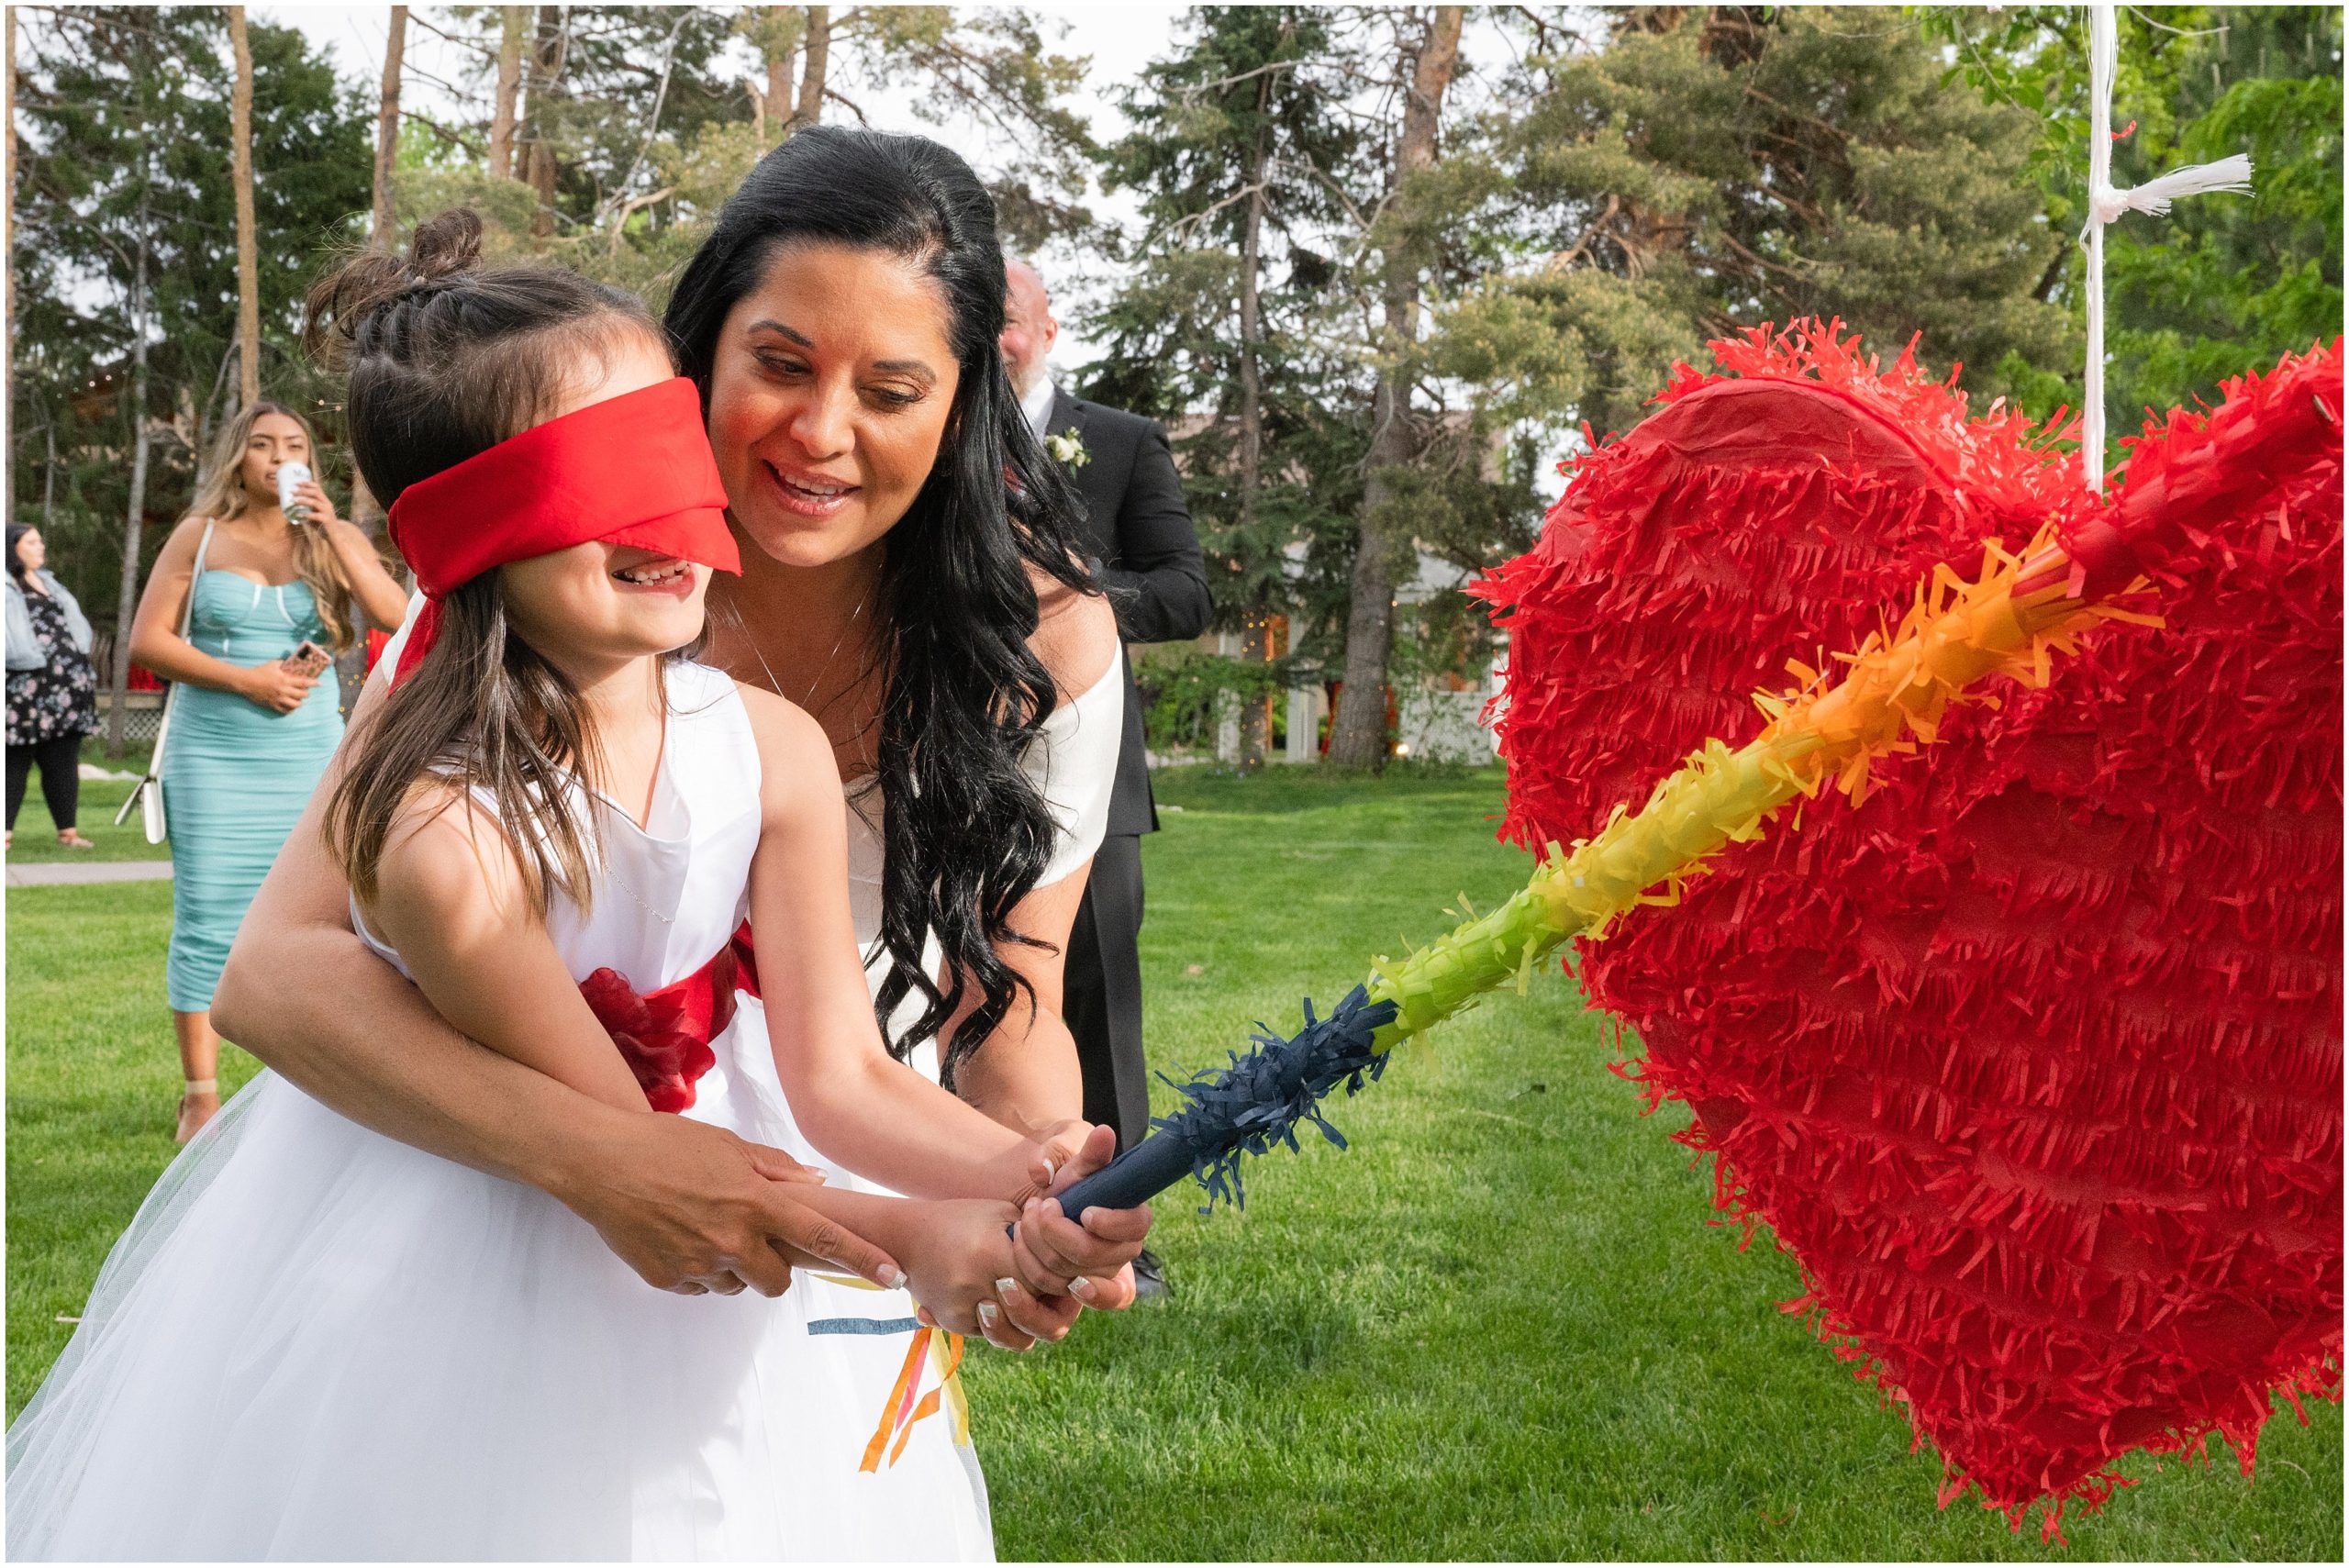 Pinata breaking during wedding | Red and Black Oak Hills Utah Spring Wedding | Jessie and Dallin Photography